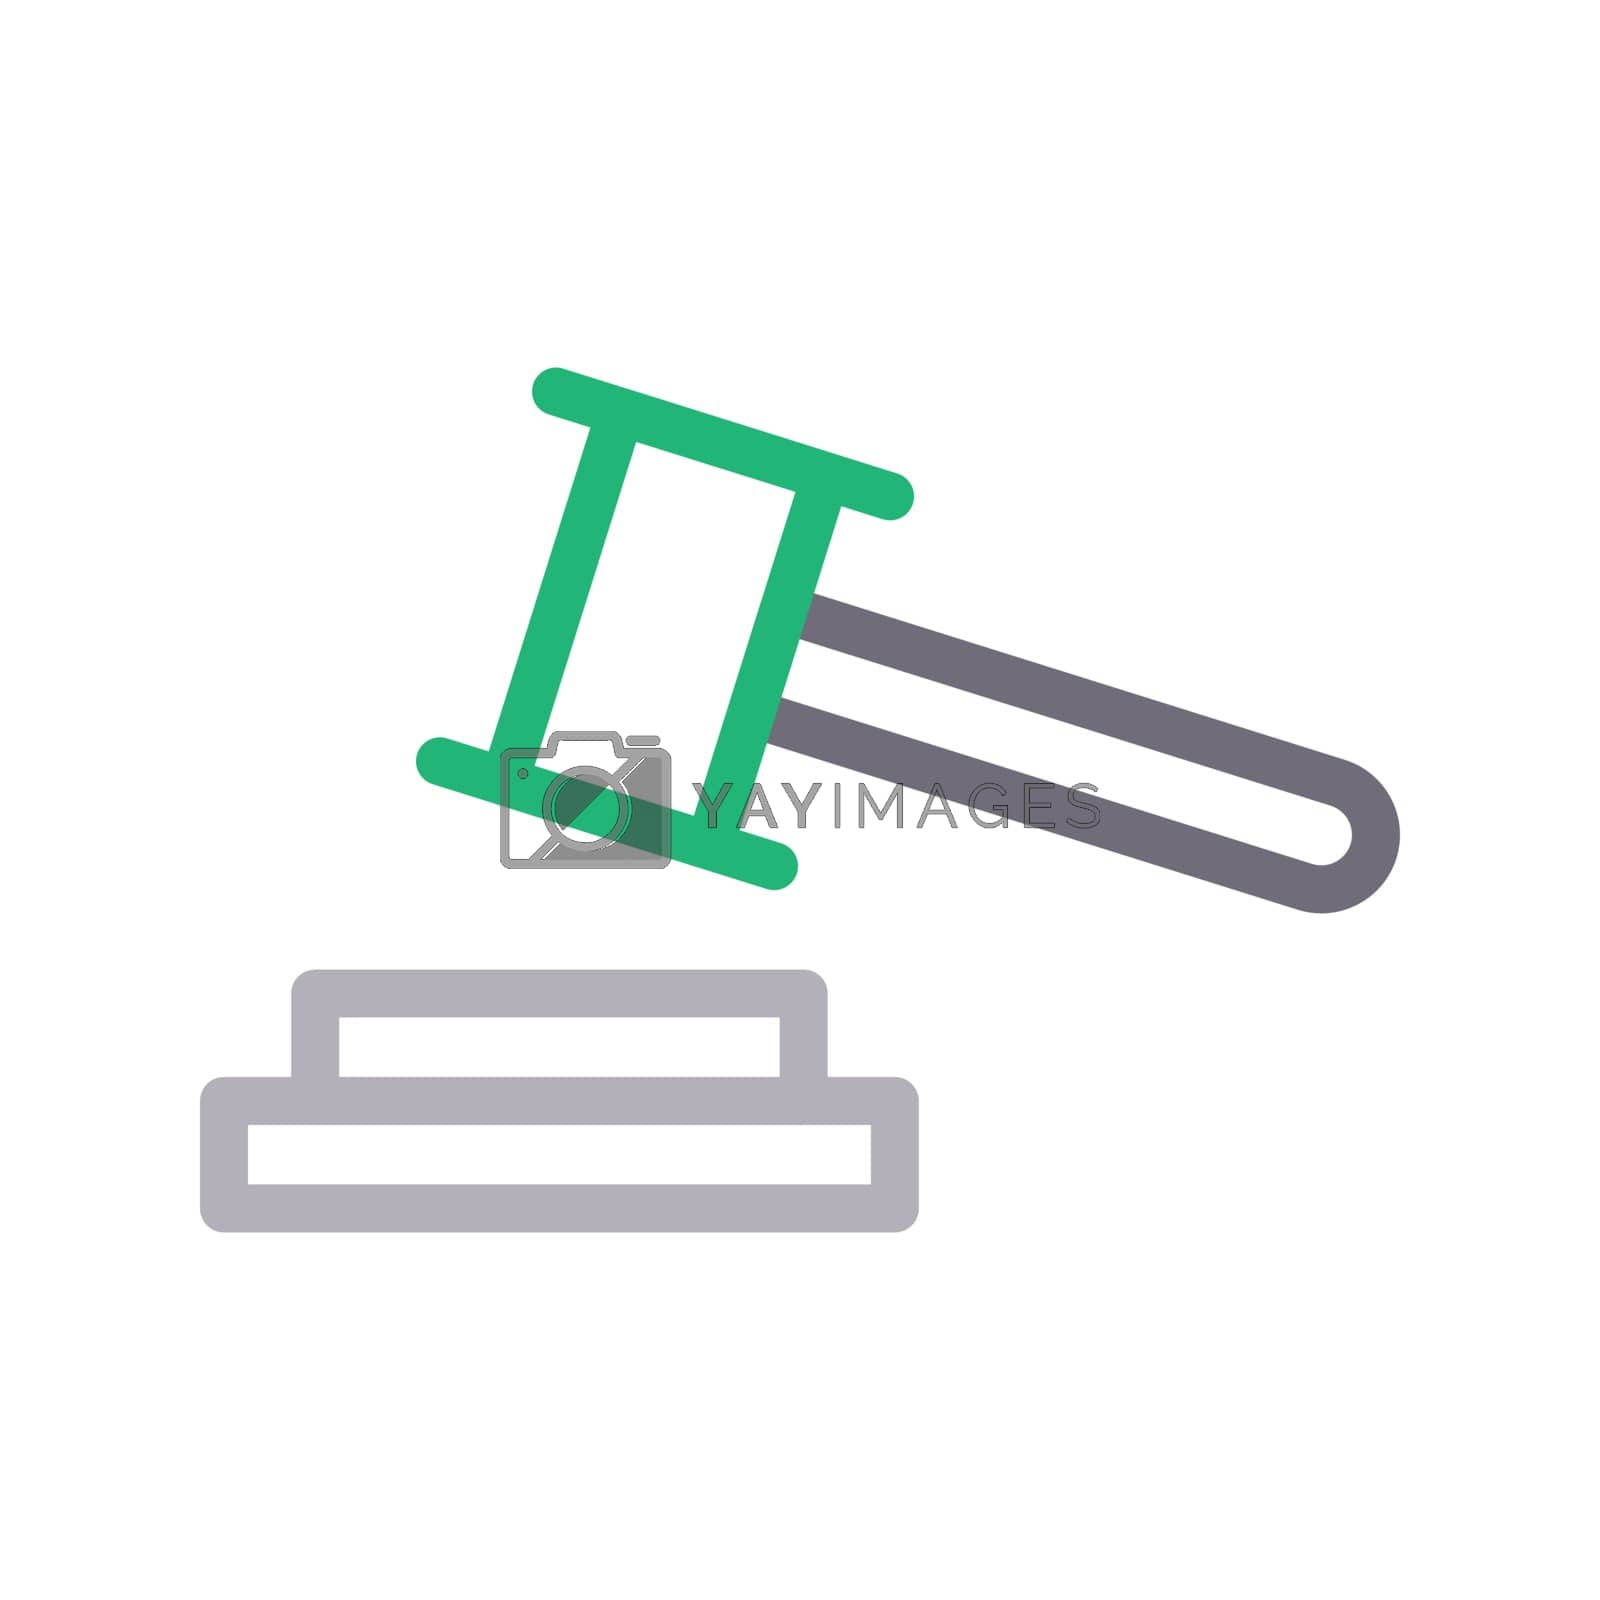 Royalty free image of law by vectorstall